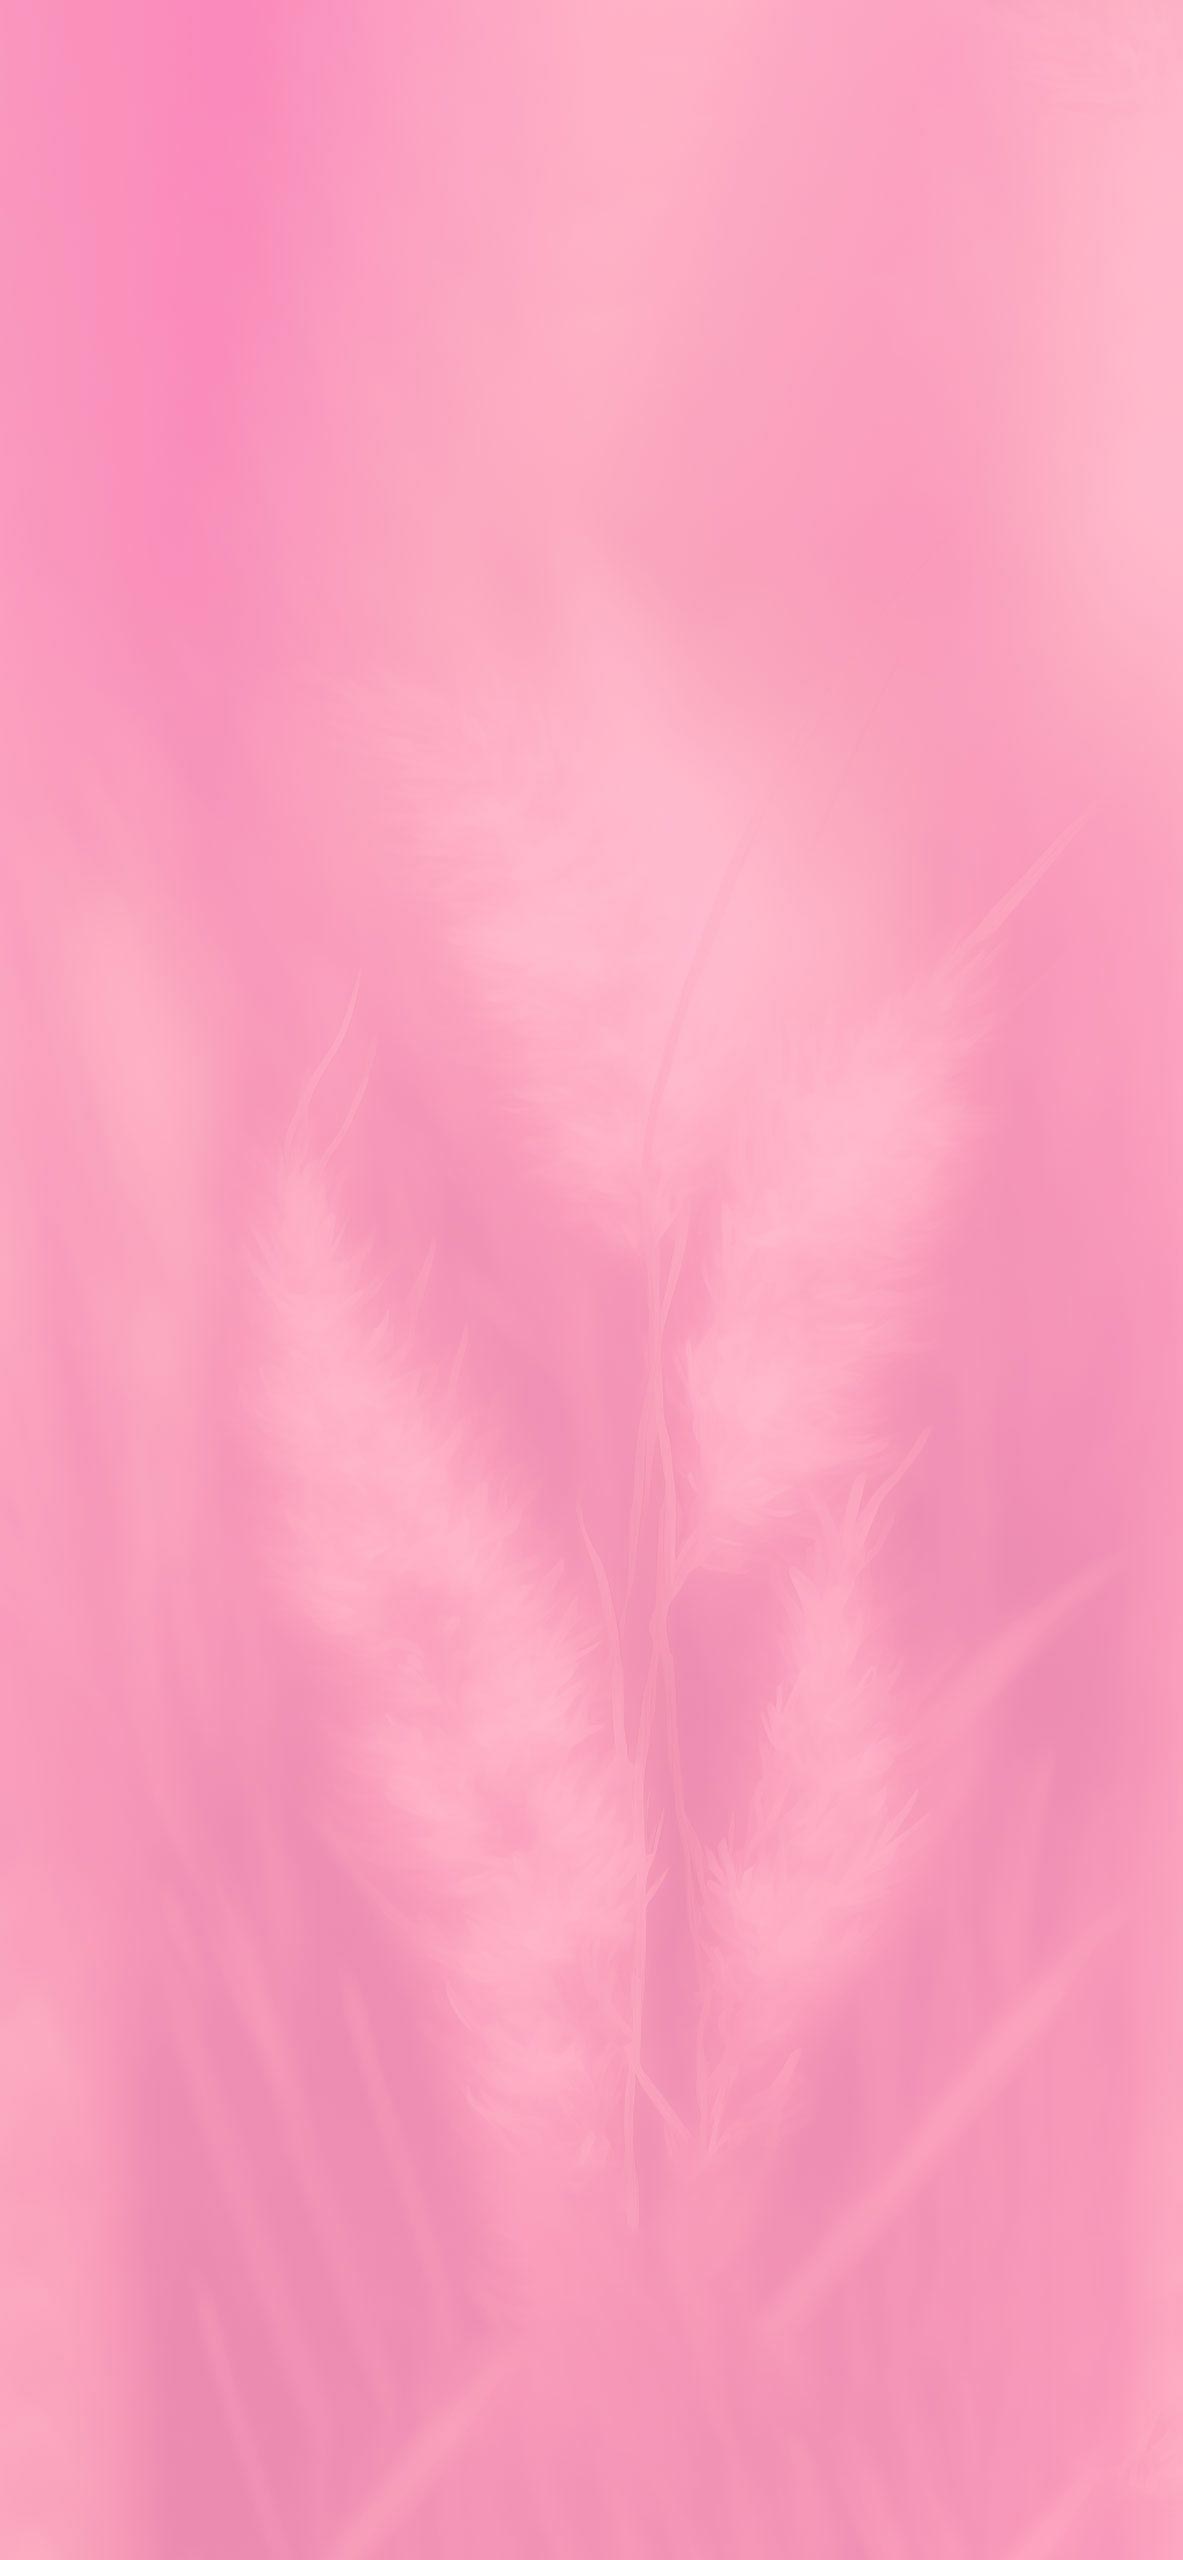 abstract art light pink background